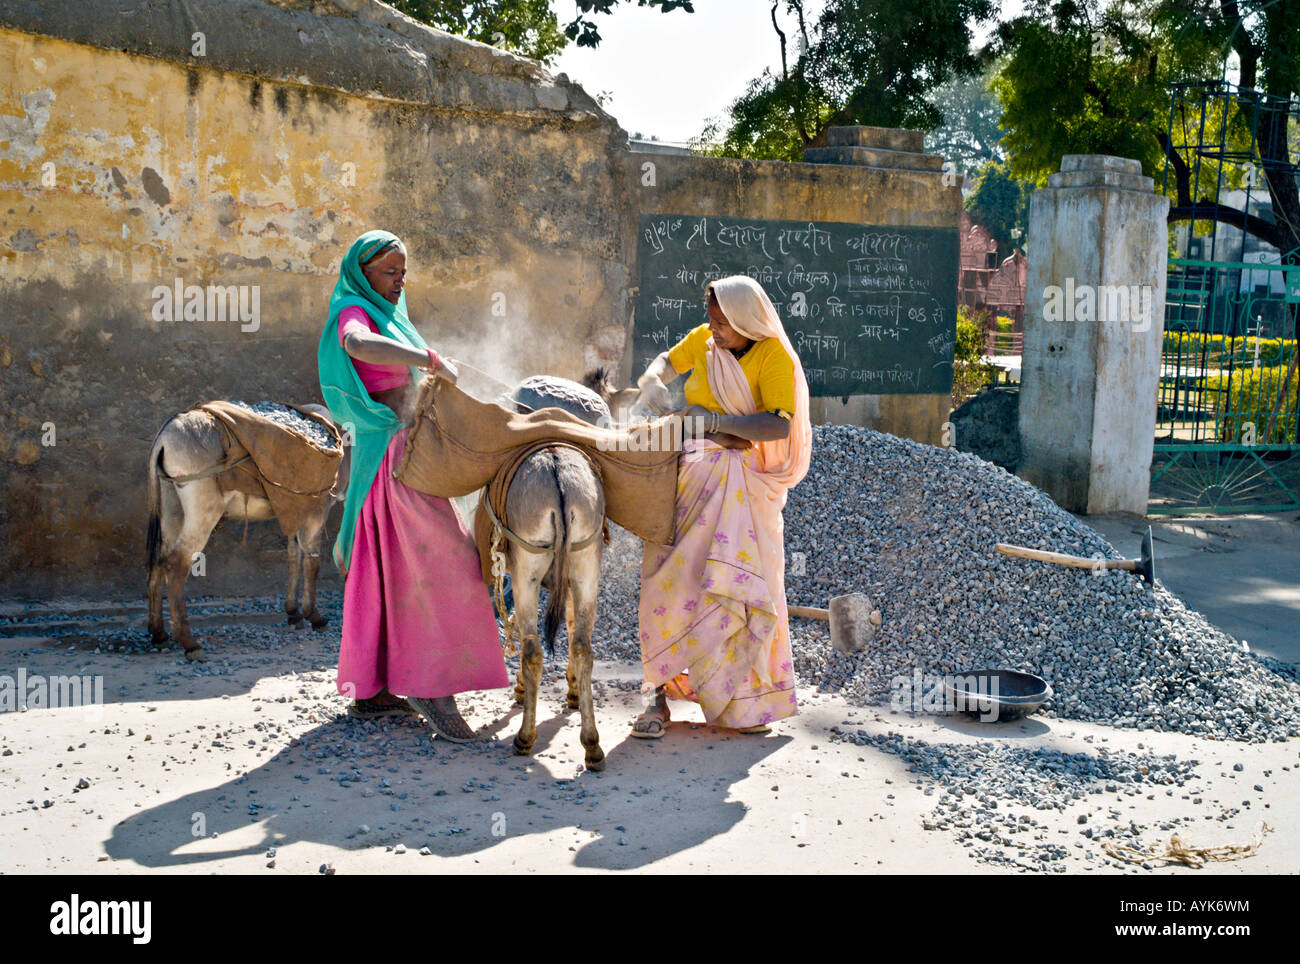 INDIA UDAIPUR Two Indian women dressed in beautiful bright colored saris work road construction loading gravel on donkeys Stock Photo